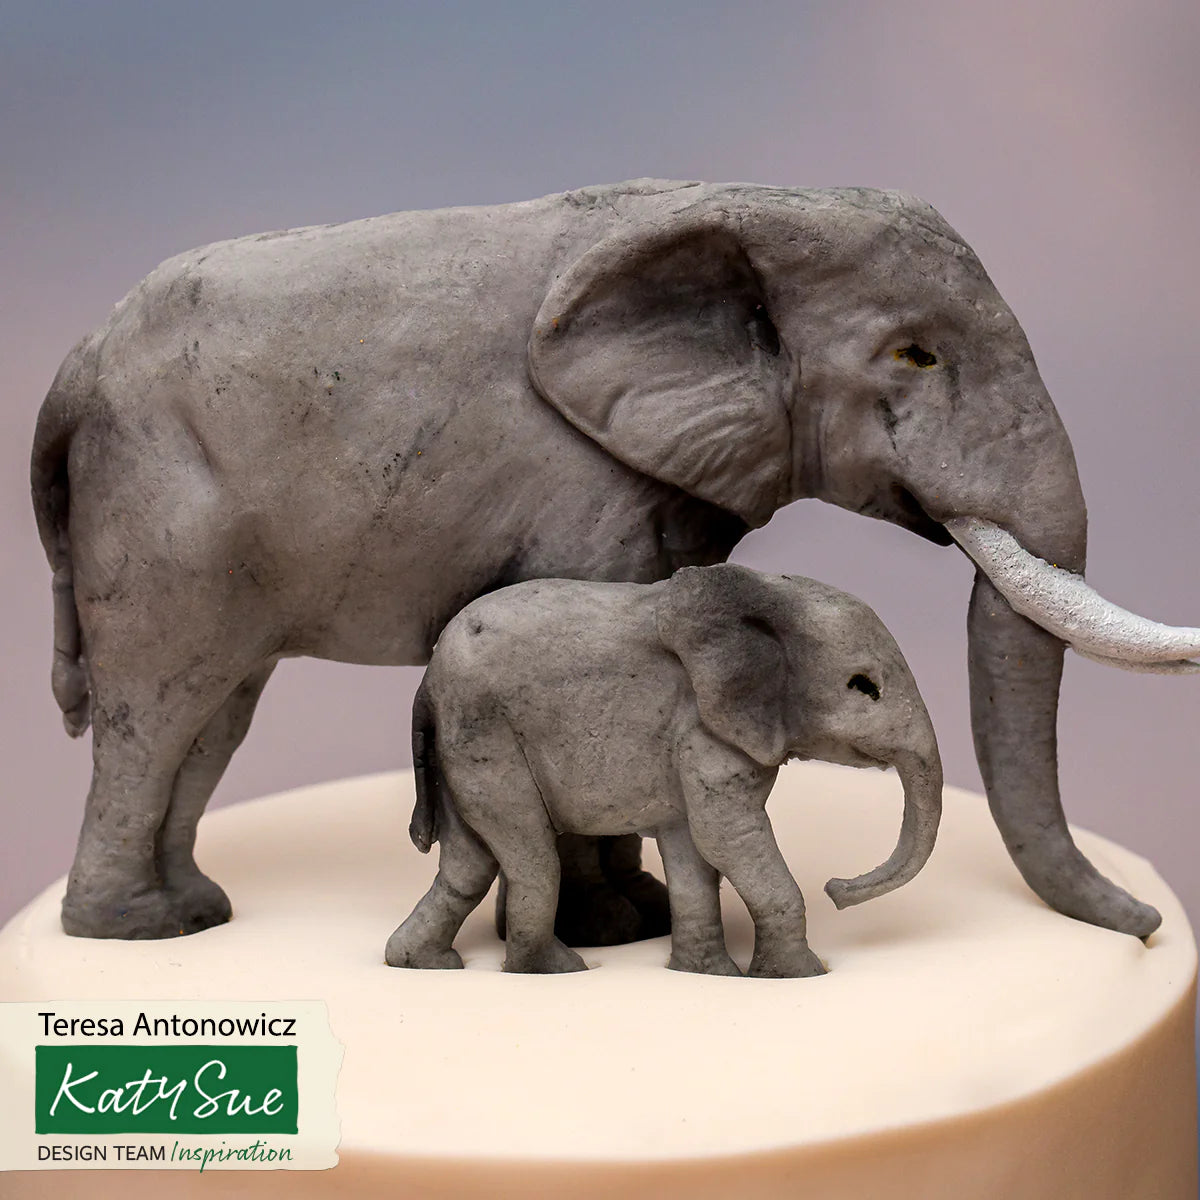 Elephant Family Silicone Mould